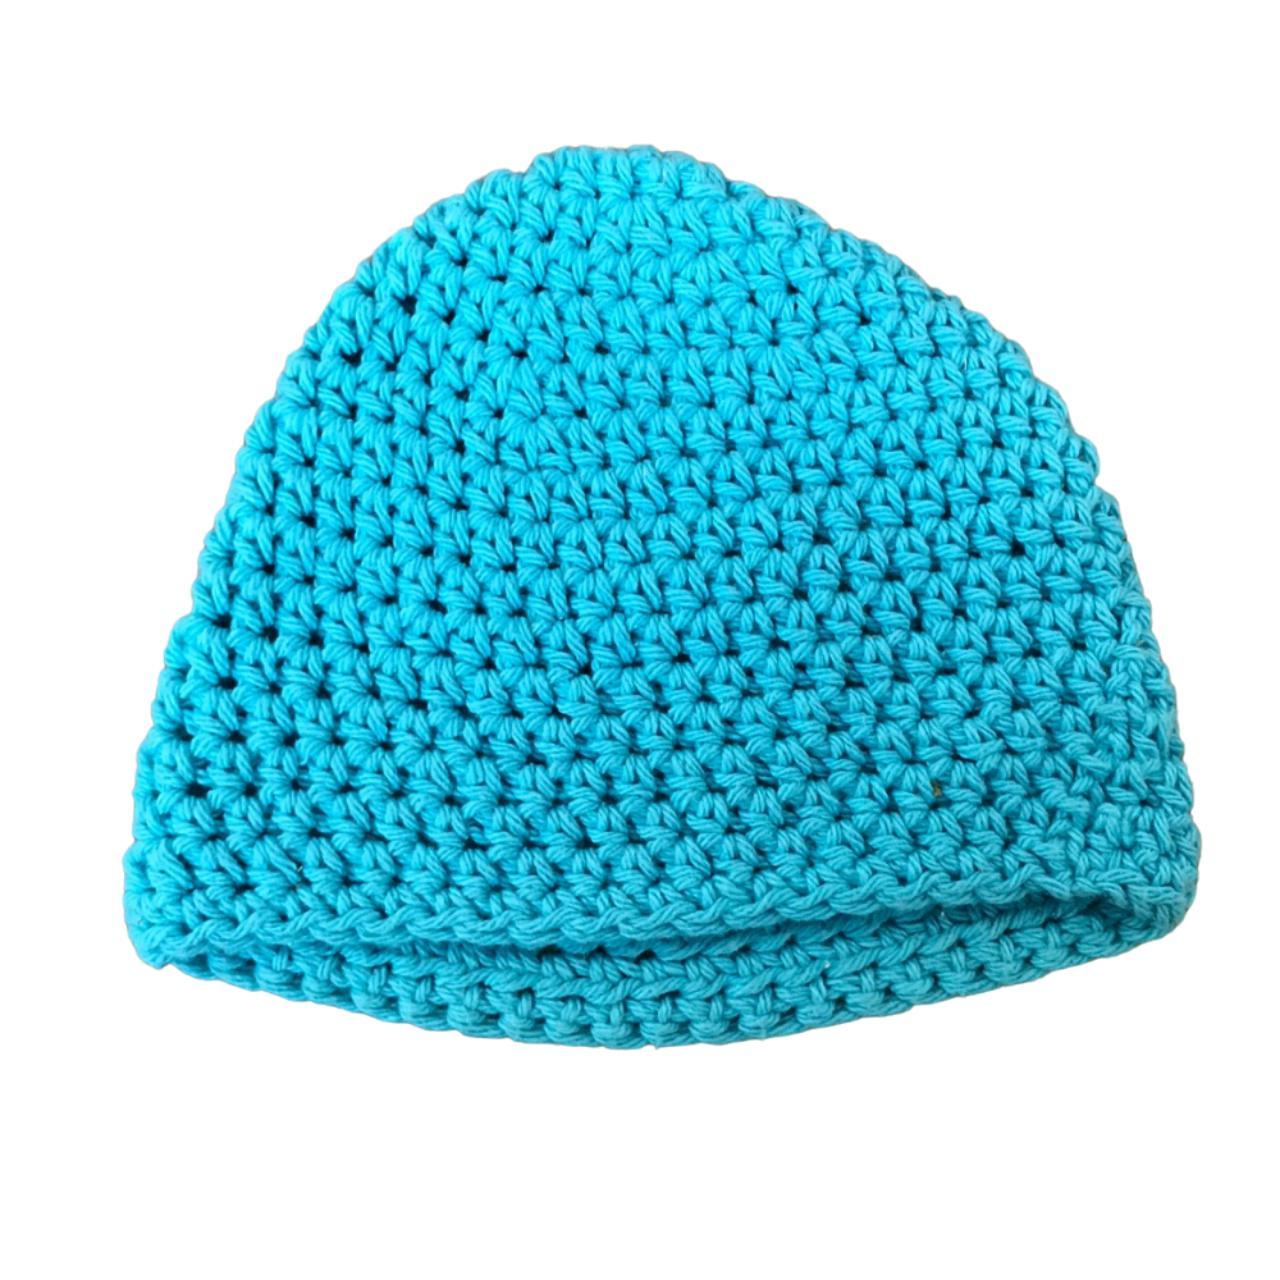 Product Image 1 - Handmade Handknit Crocheted Turquoise Blue